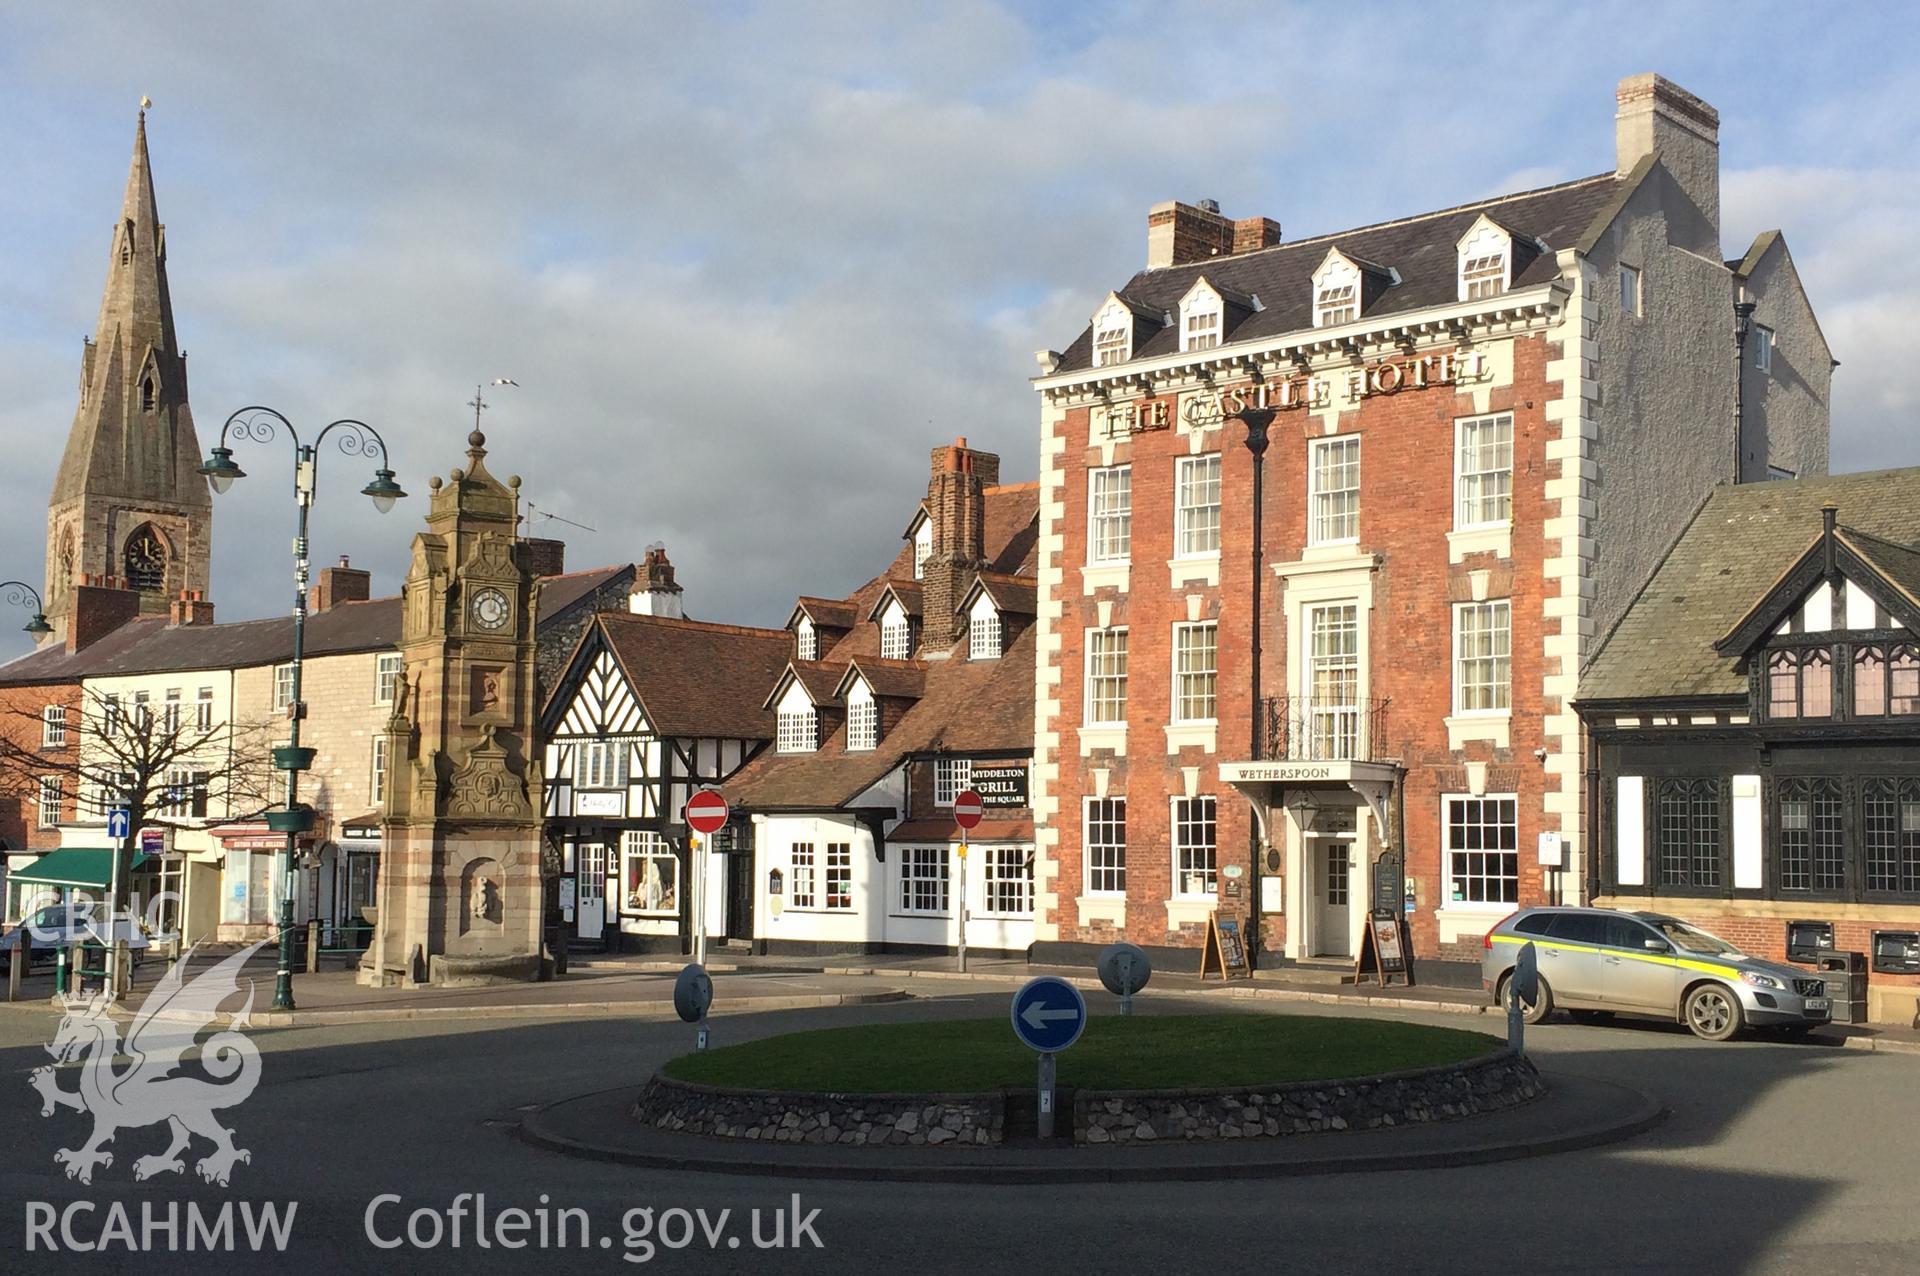 Colour photo showing buildings in Ruthin,  produced by Paul R. Davis,  13th March 2017.